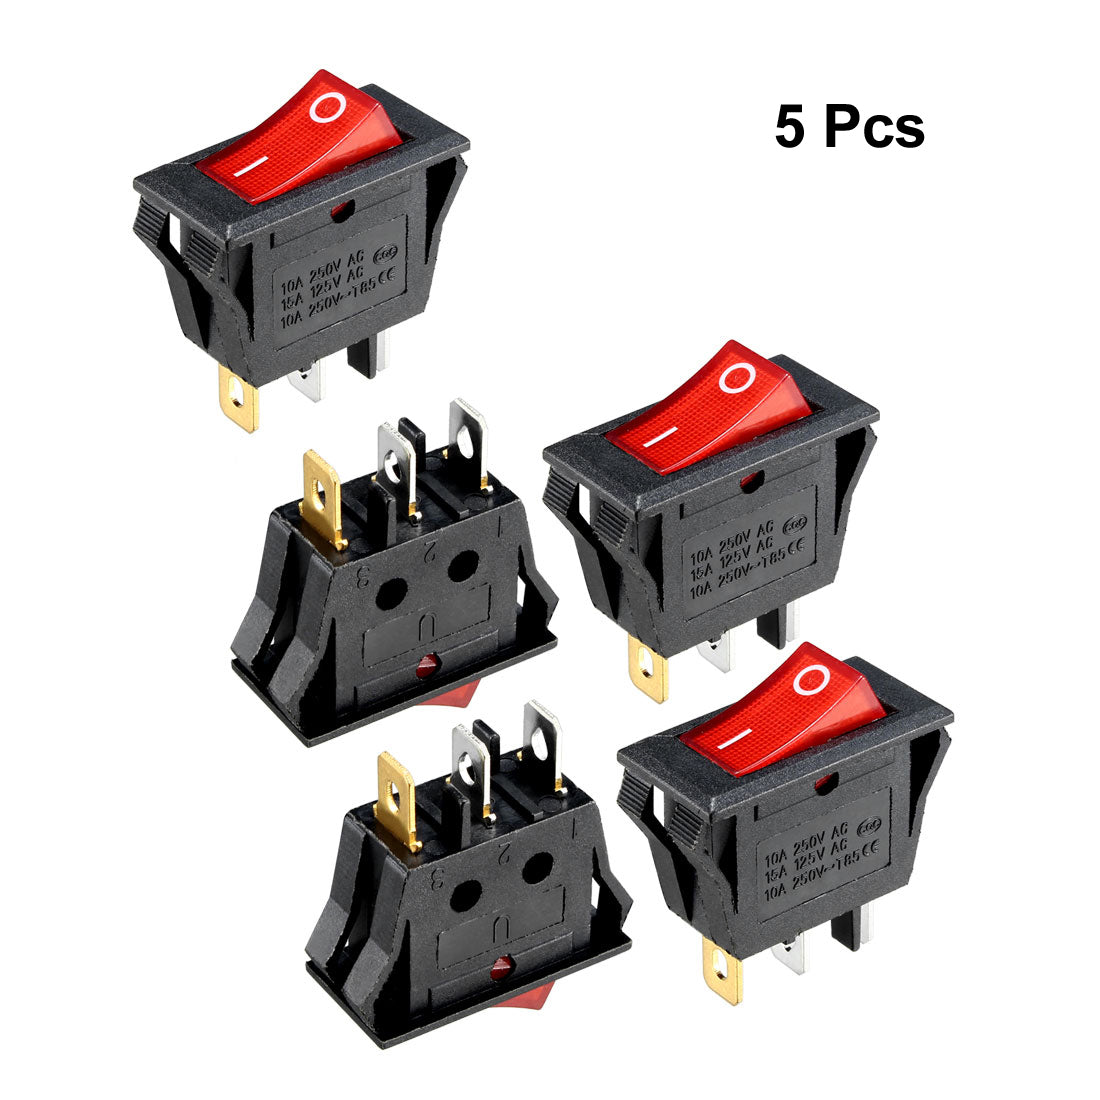 uxcell Uxcell 5pcs AC 250V/10A 125V/15A 3P I/O 2 Position Snap-in Boat Rocker Switch Red Black